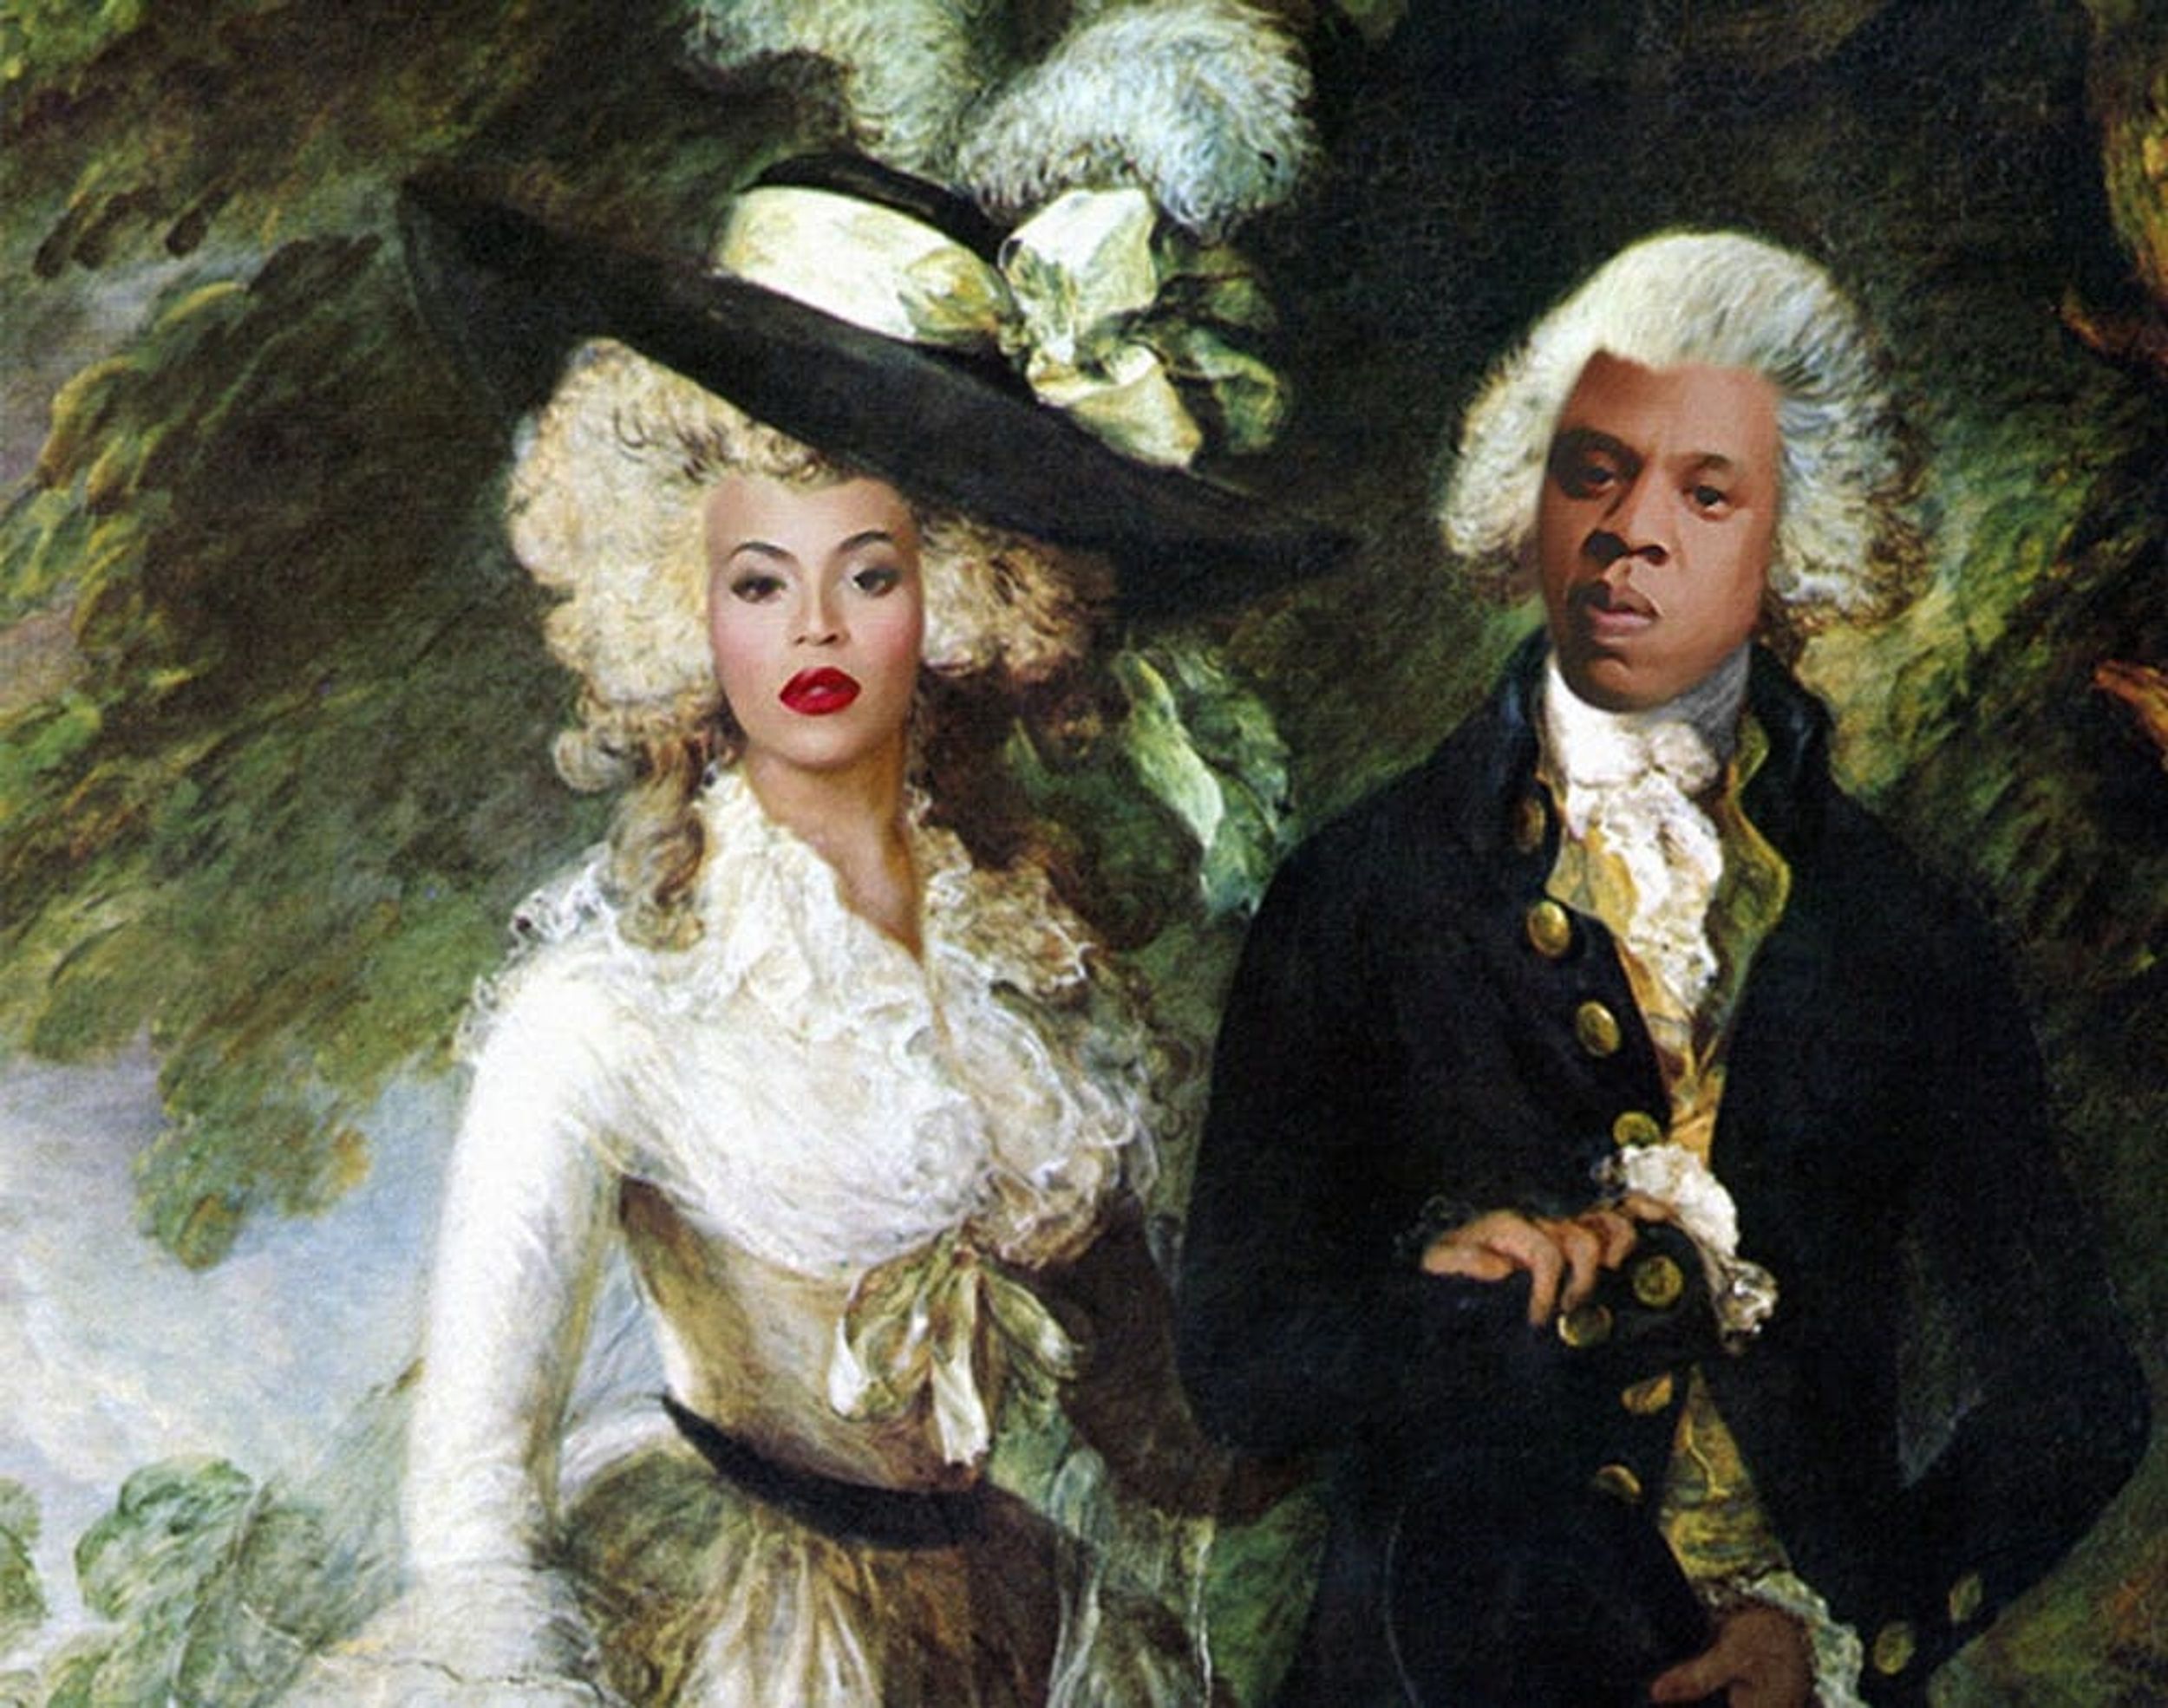 These Beyoncé Family Photos Are ROYALLY Awesome